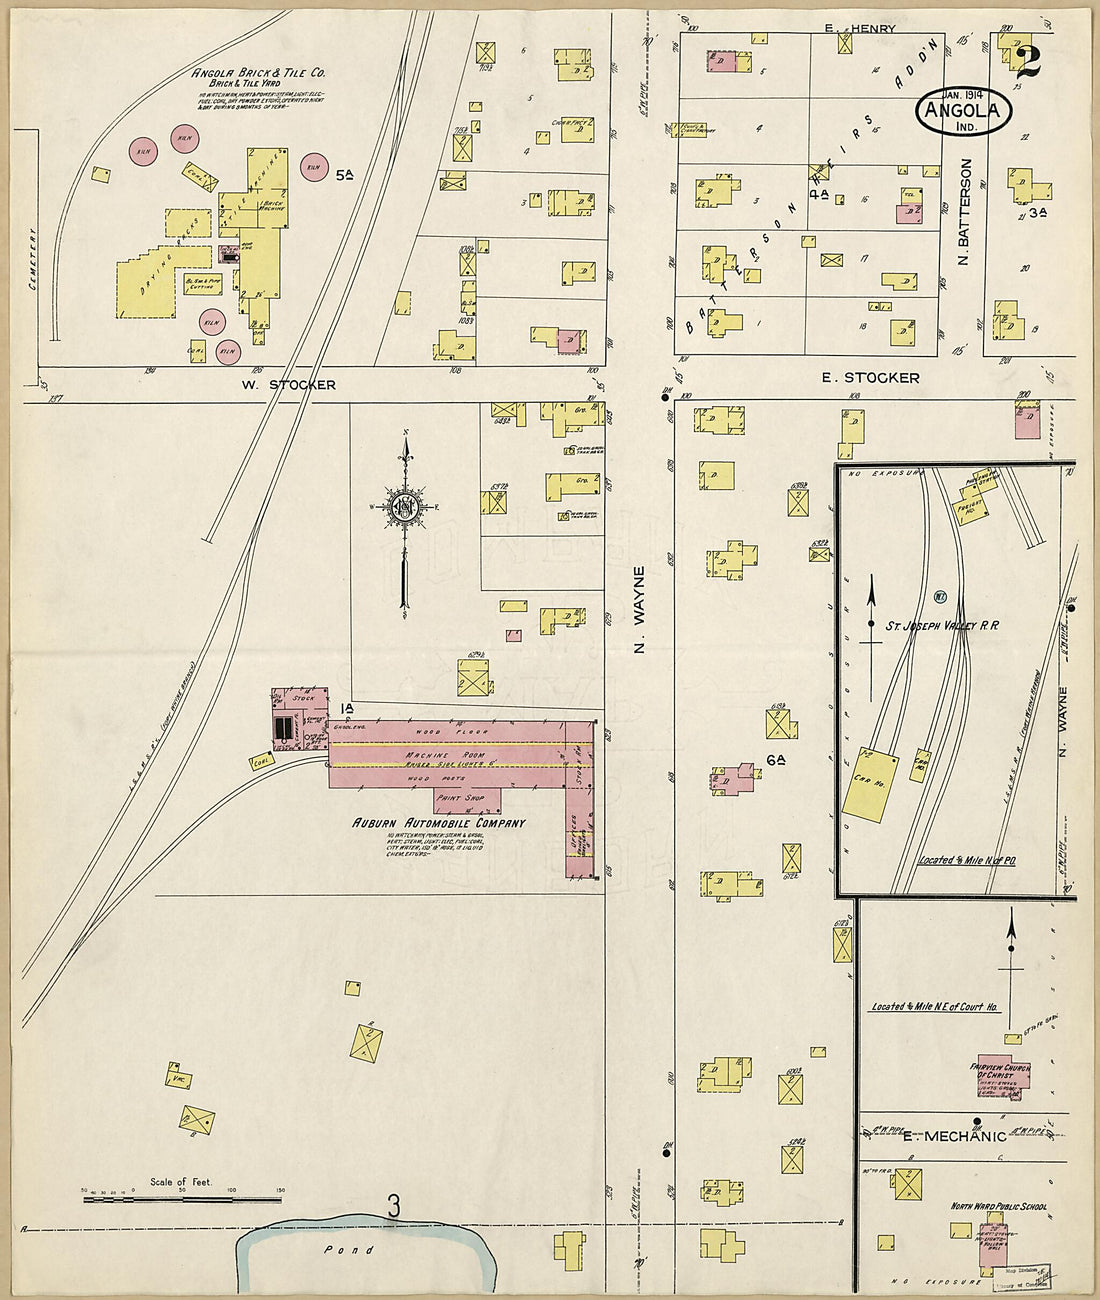 This old map of Angola, Steuben County, Indiana was created by Sanborn Map Company in 1914